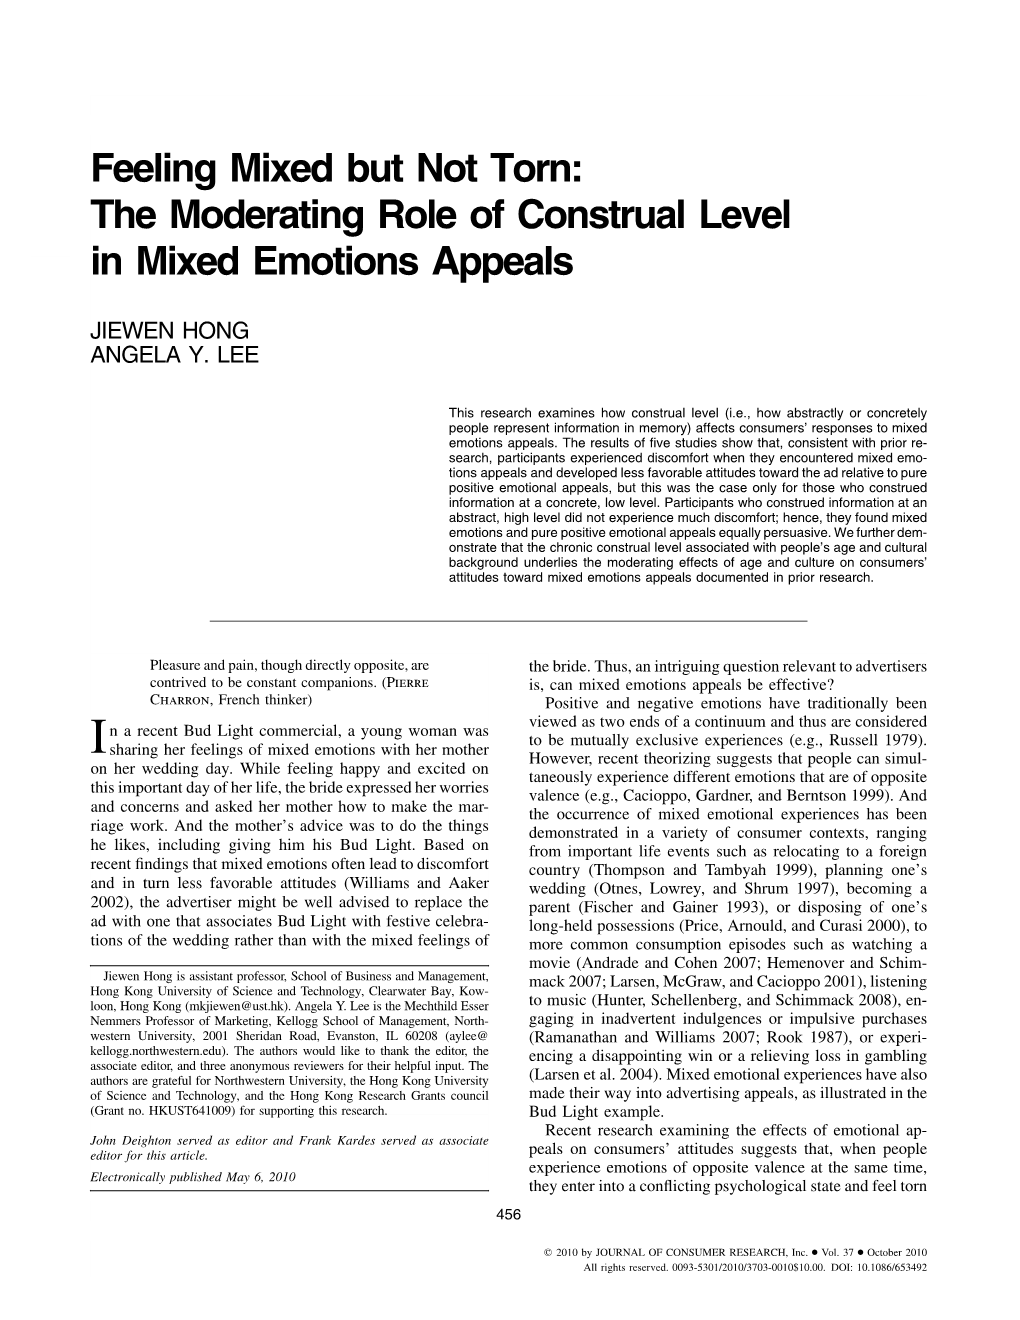 The Moderating Role of Construal Level in Mixed Emotions Appeals